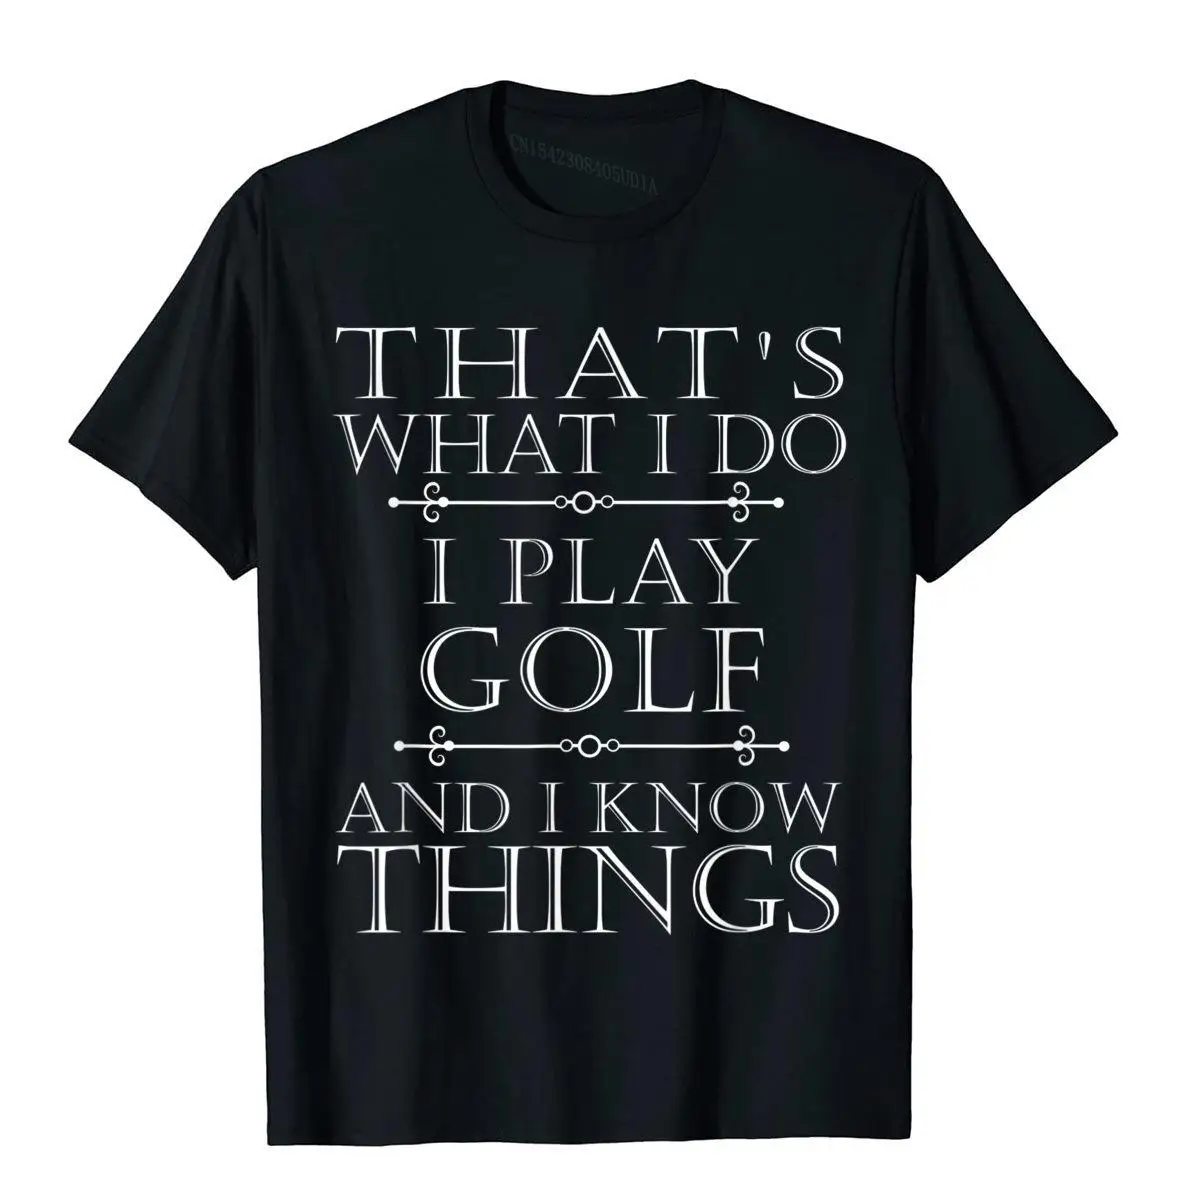 

That's What I Do I Play Golf Shirt Funny Golfer Golfing Tee Top T-Shirts Printing Prevalent Cotton Tees Camisa For Men